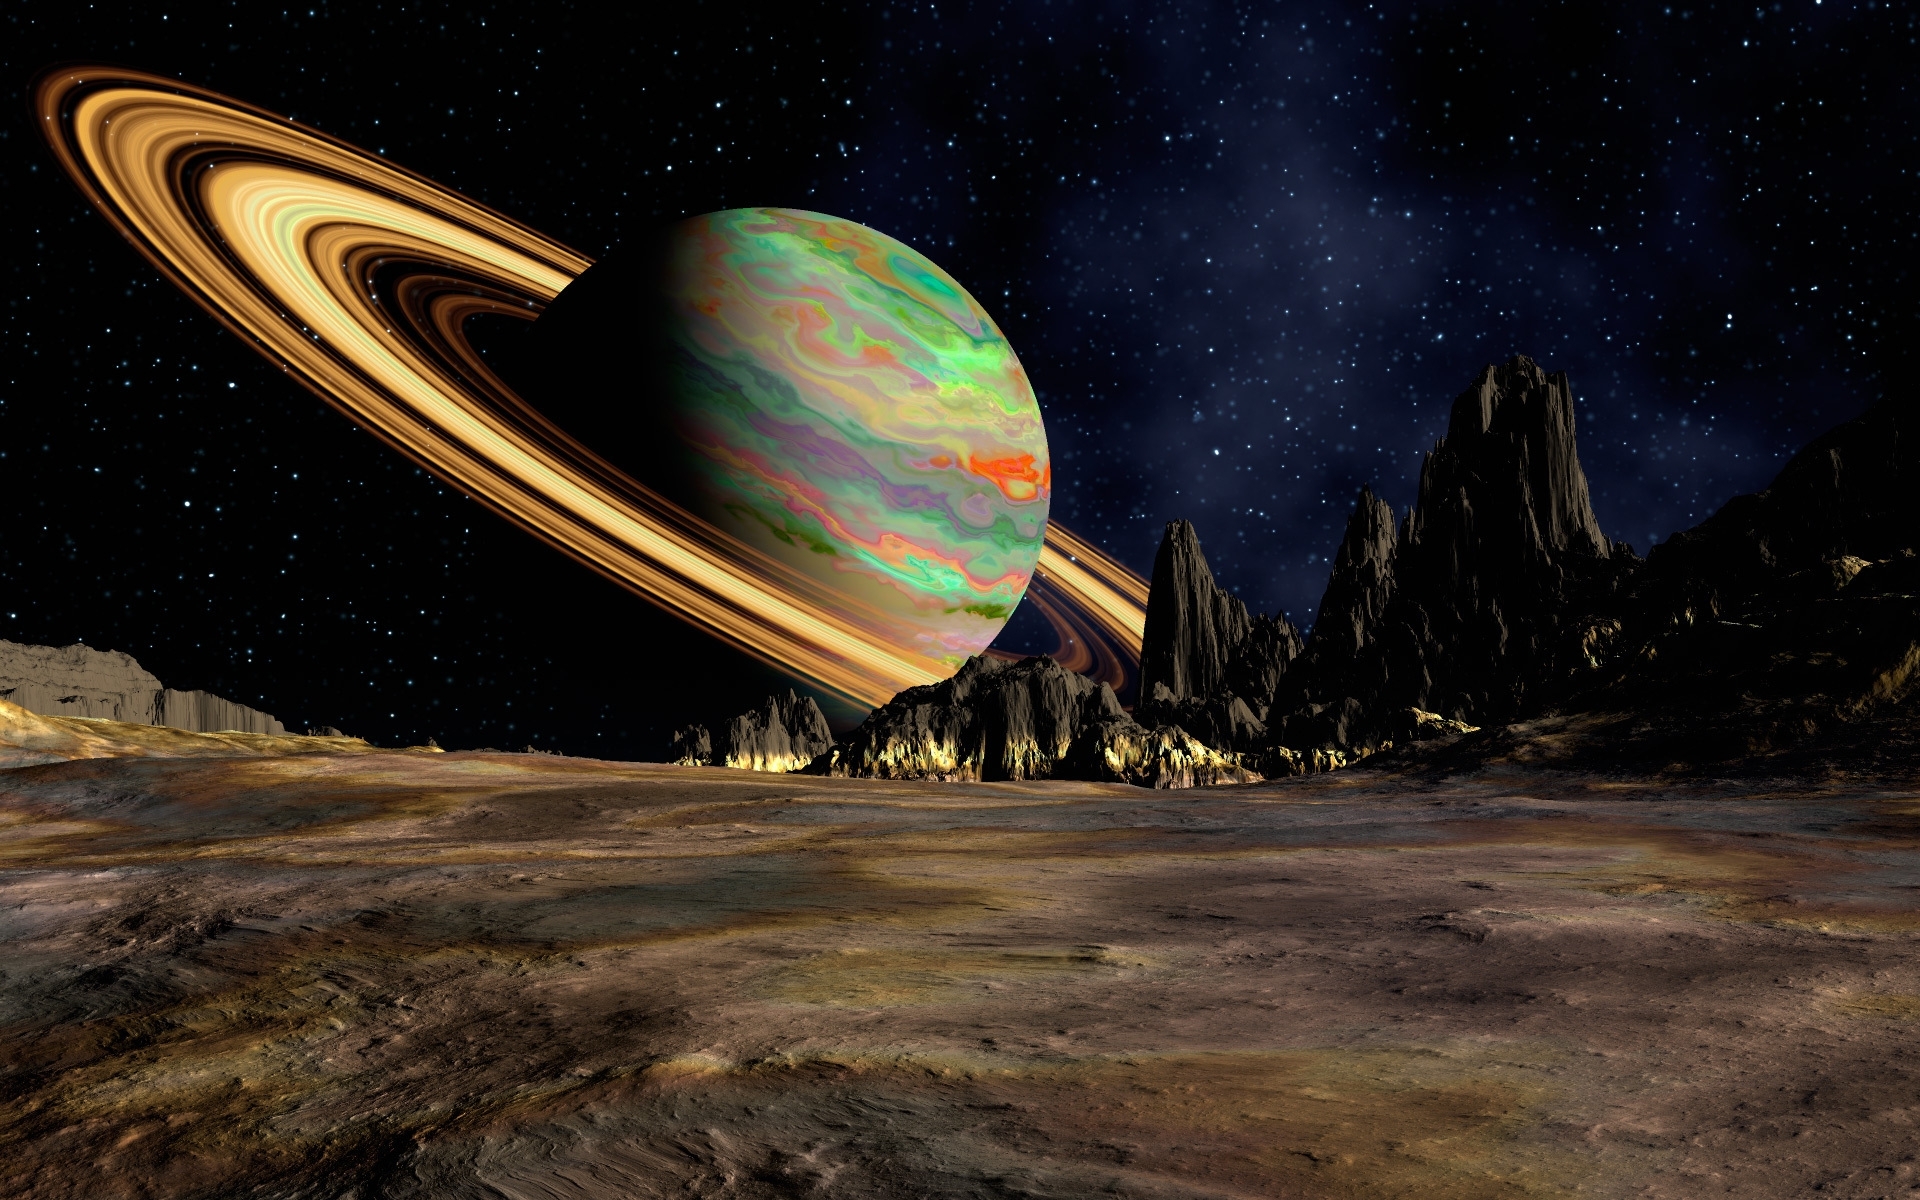 Graphics 3d Wallpapers PLANET SATURN SPACE RING 0982 7937 1920x1200 1920x1200